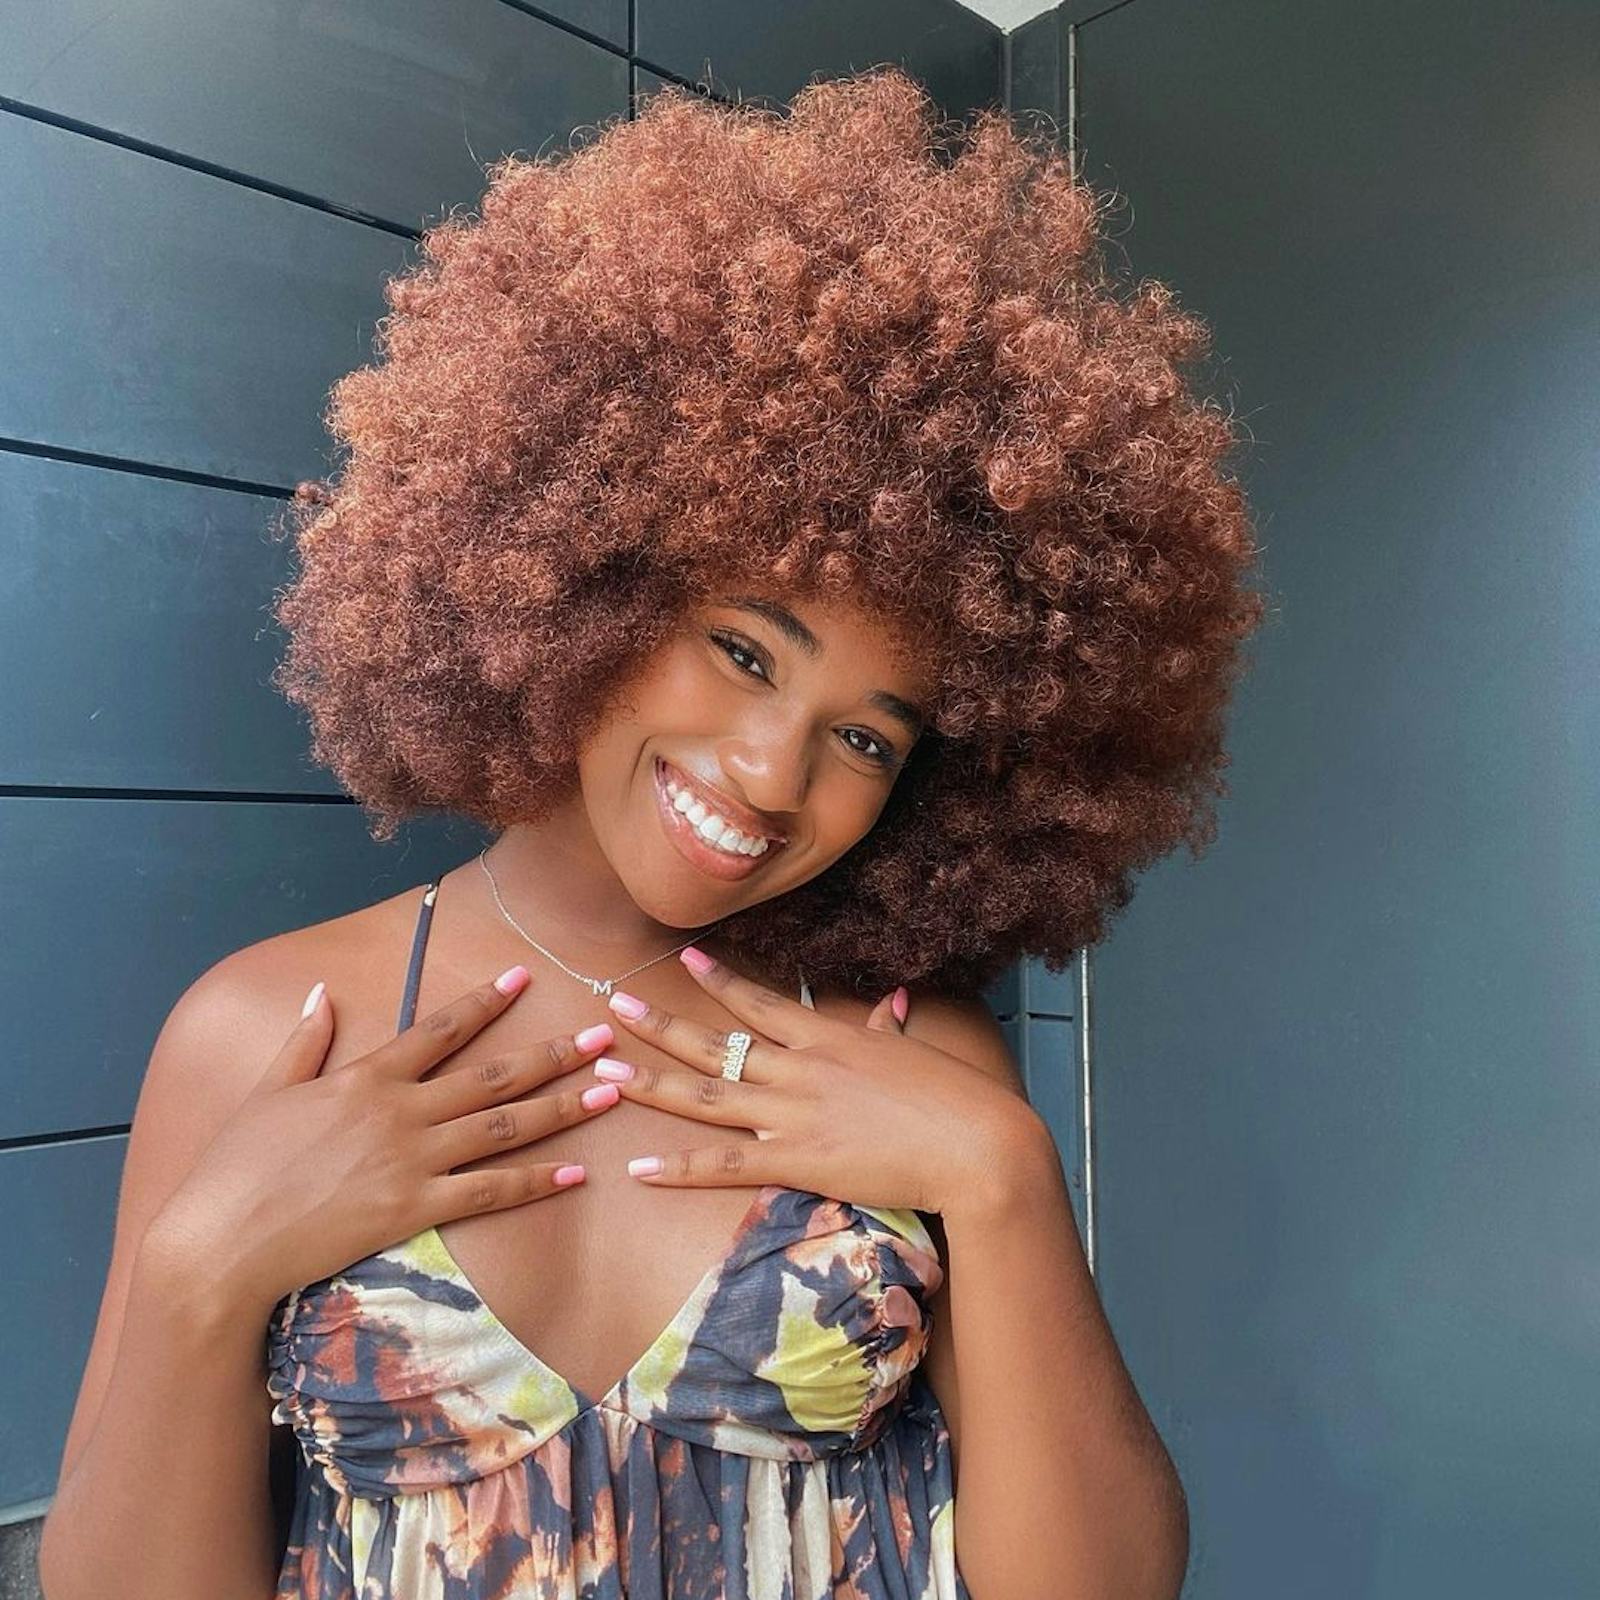 If You're Looking For Natural Hair Inspiration, These Are The Women To Follow